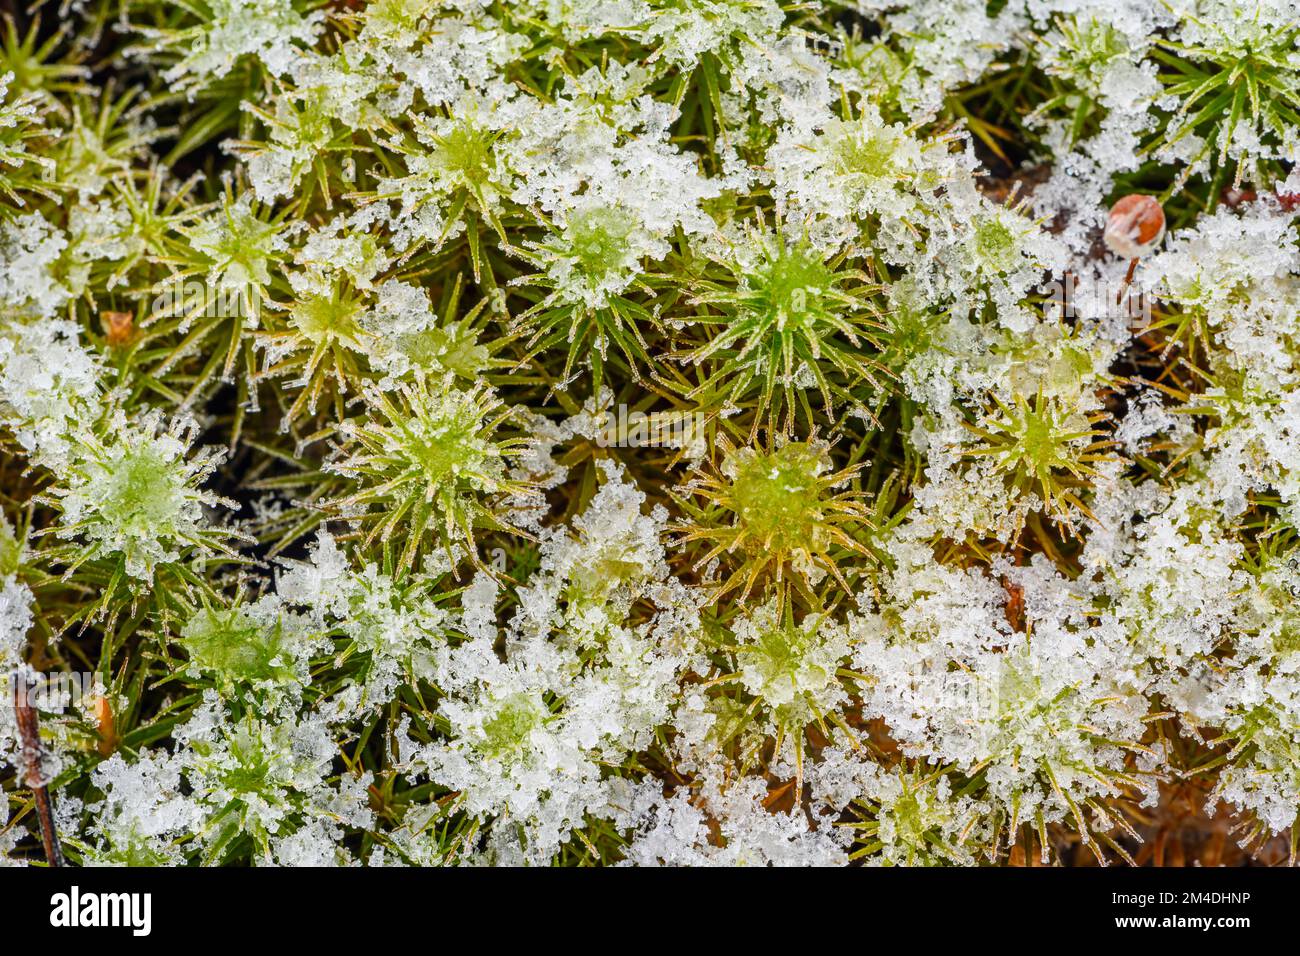 A dusting of snow on Haircap moss (Polytrichum commune), Greater Sudbury, Ontario, Canada Stock Photo